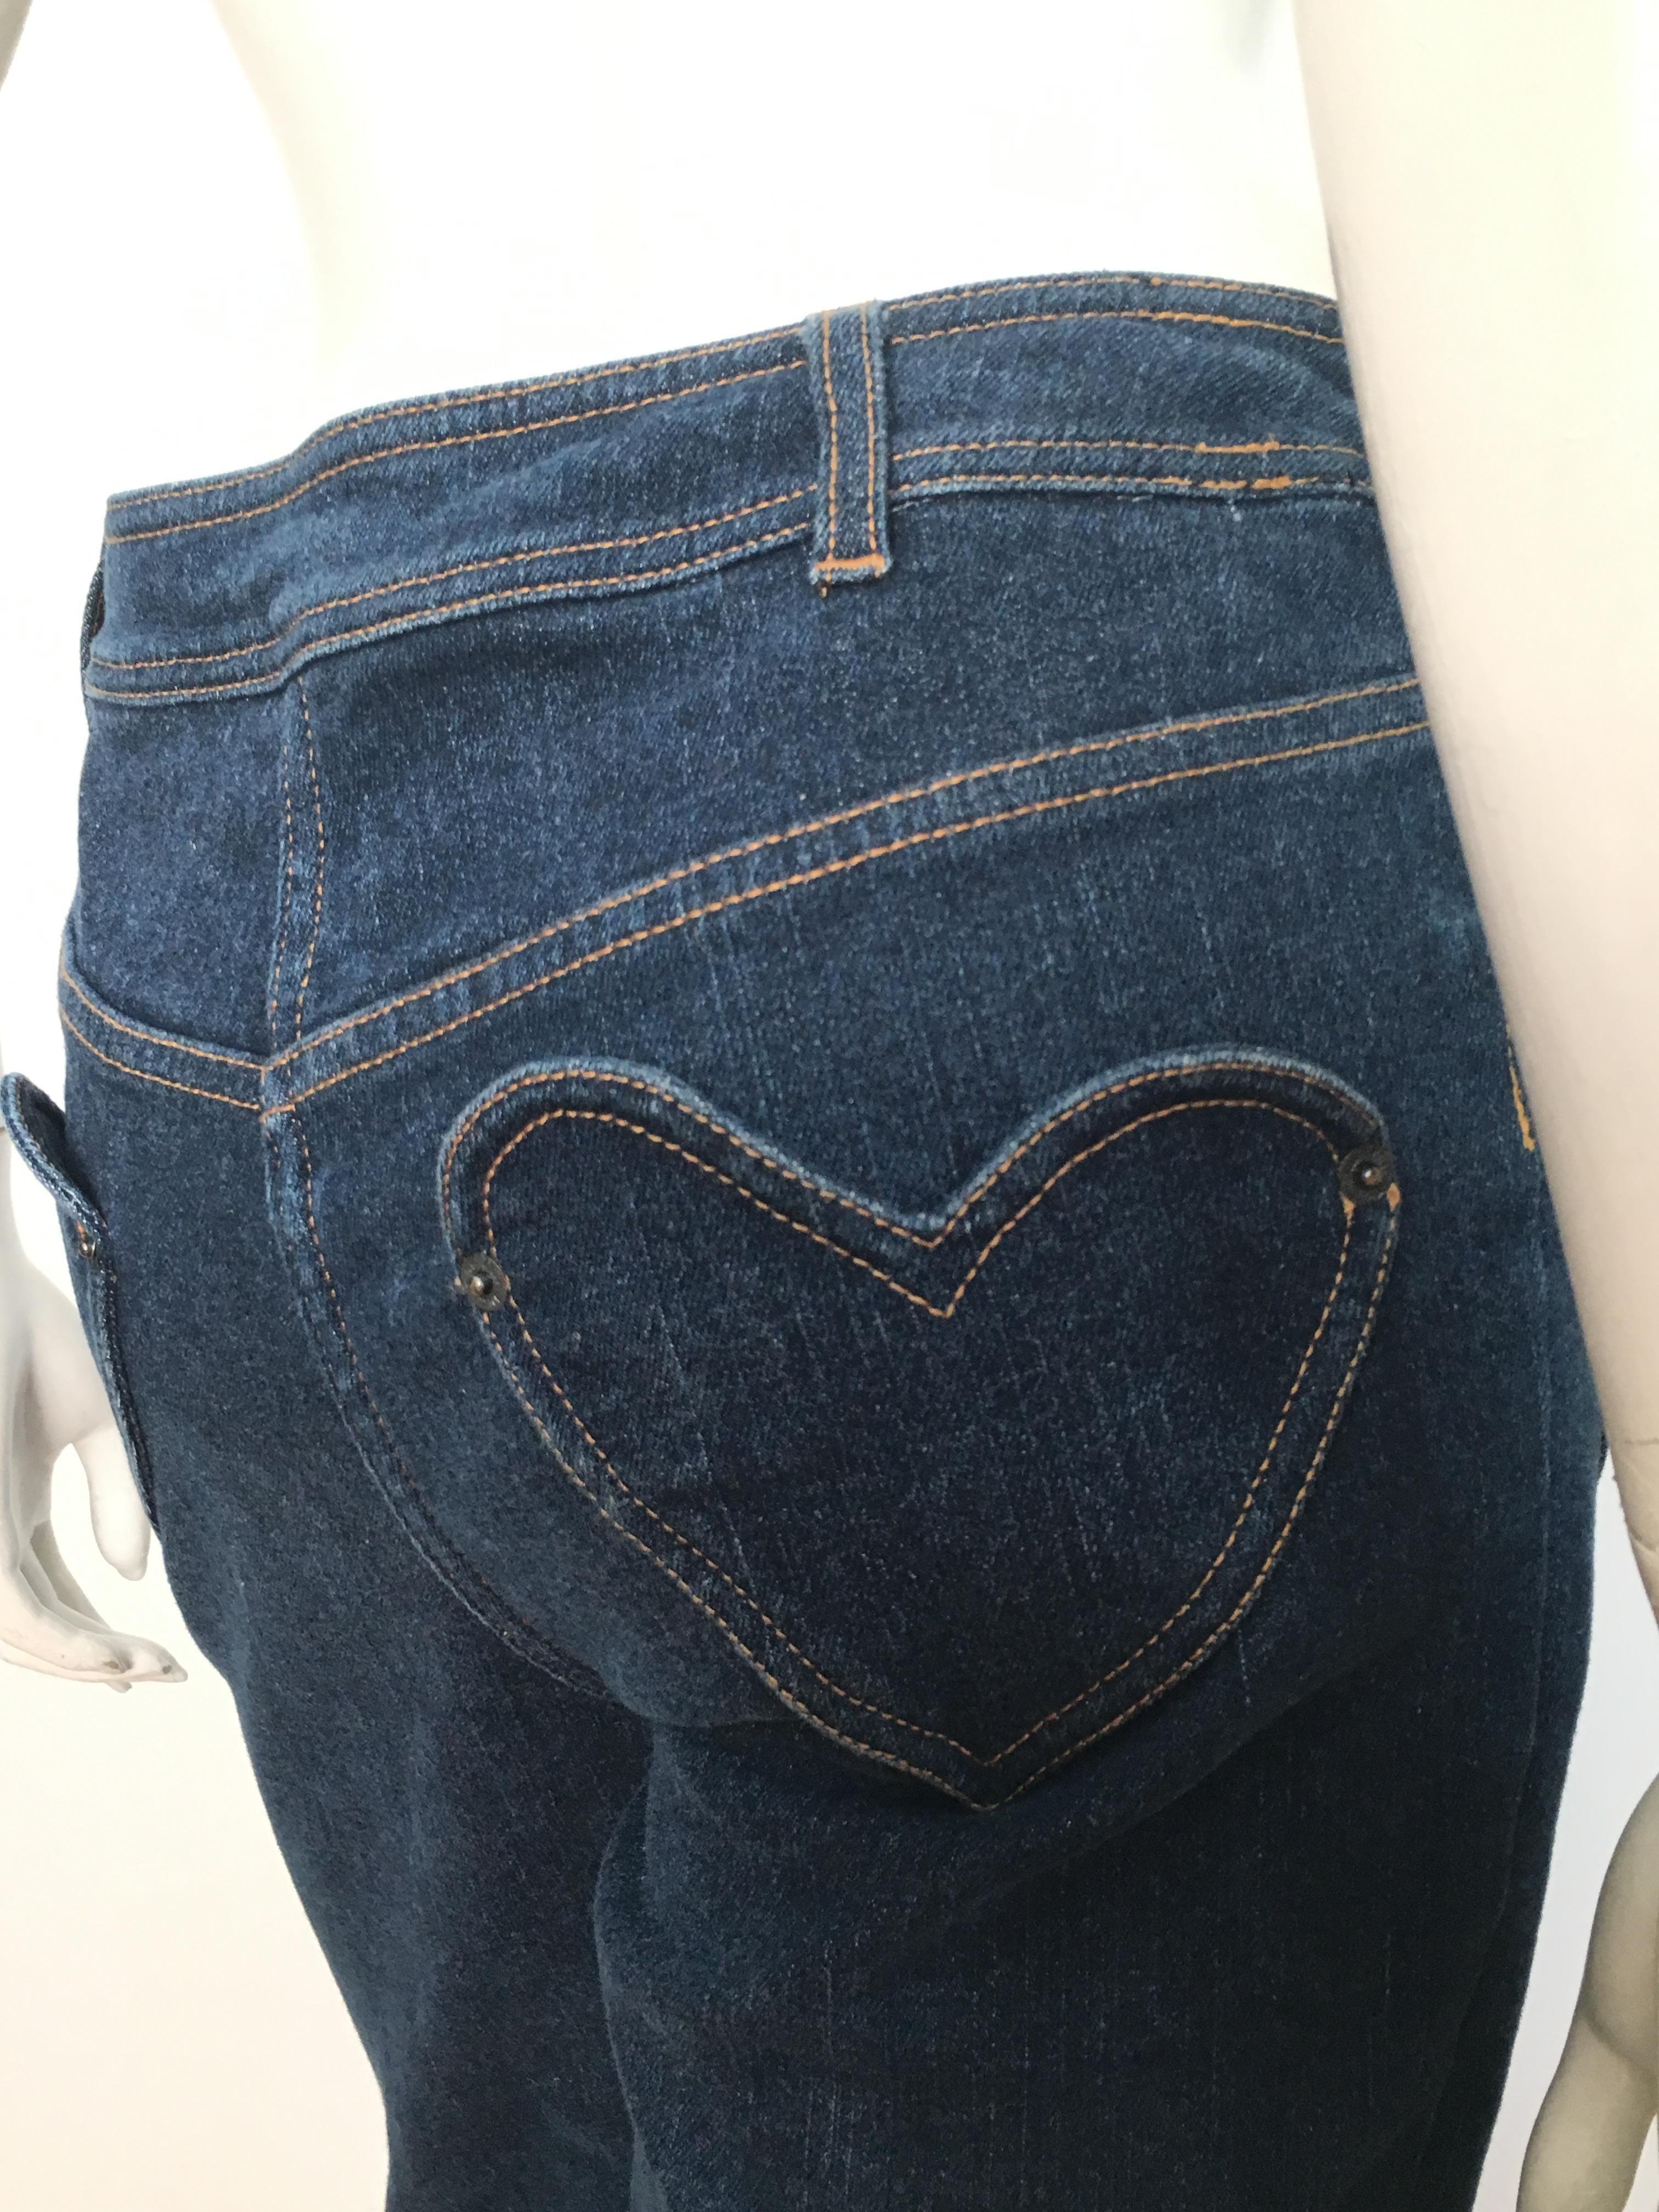 Dior Denim Button Up Jeans with Heart Shape Pockets Size 6.  4